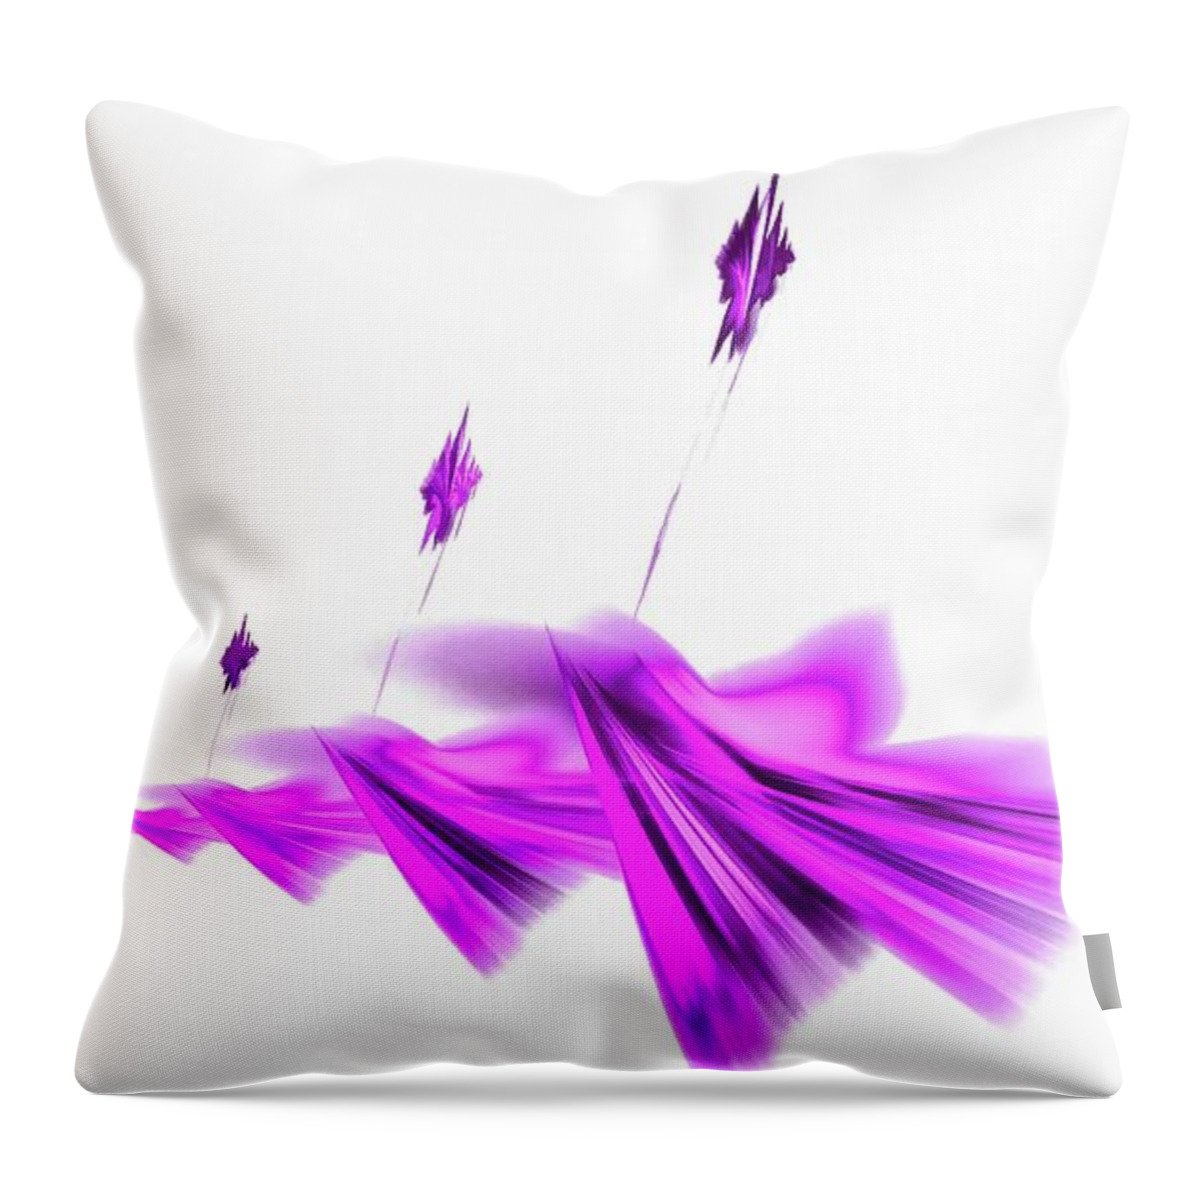 Purple Throw Pillow featuring the digital art Missile Command Purple by Don Northup